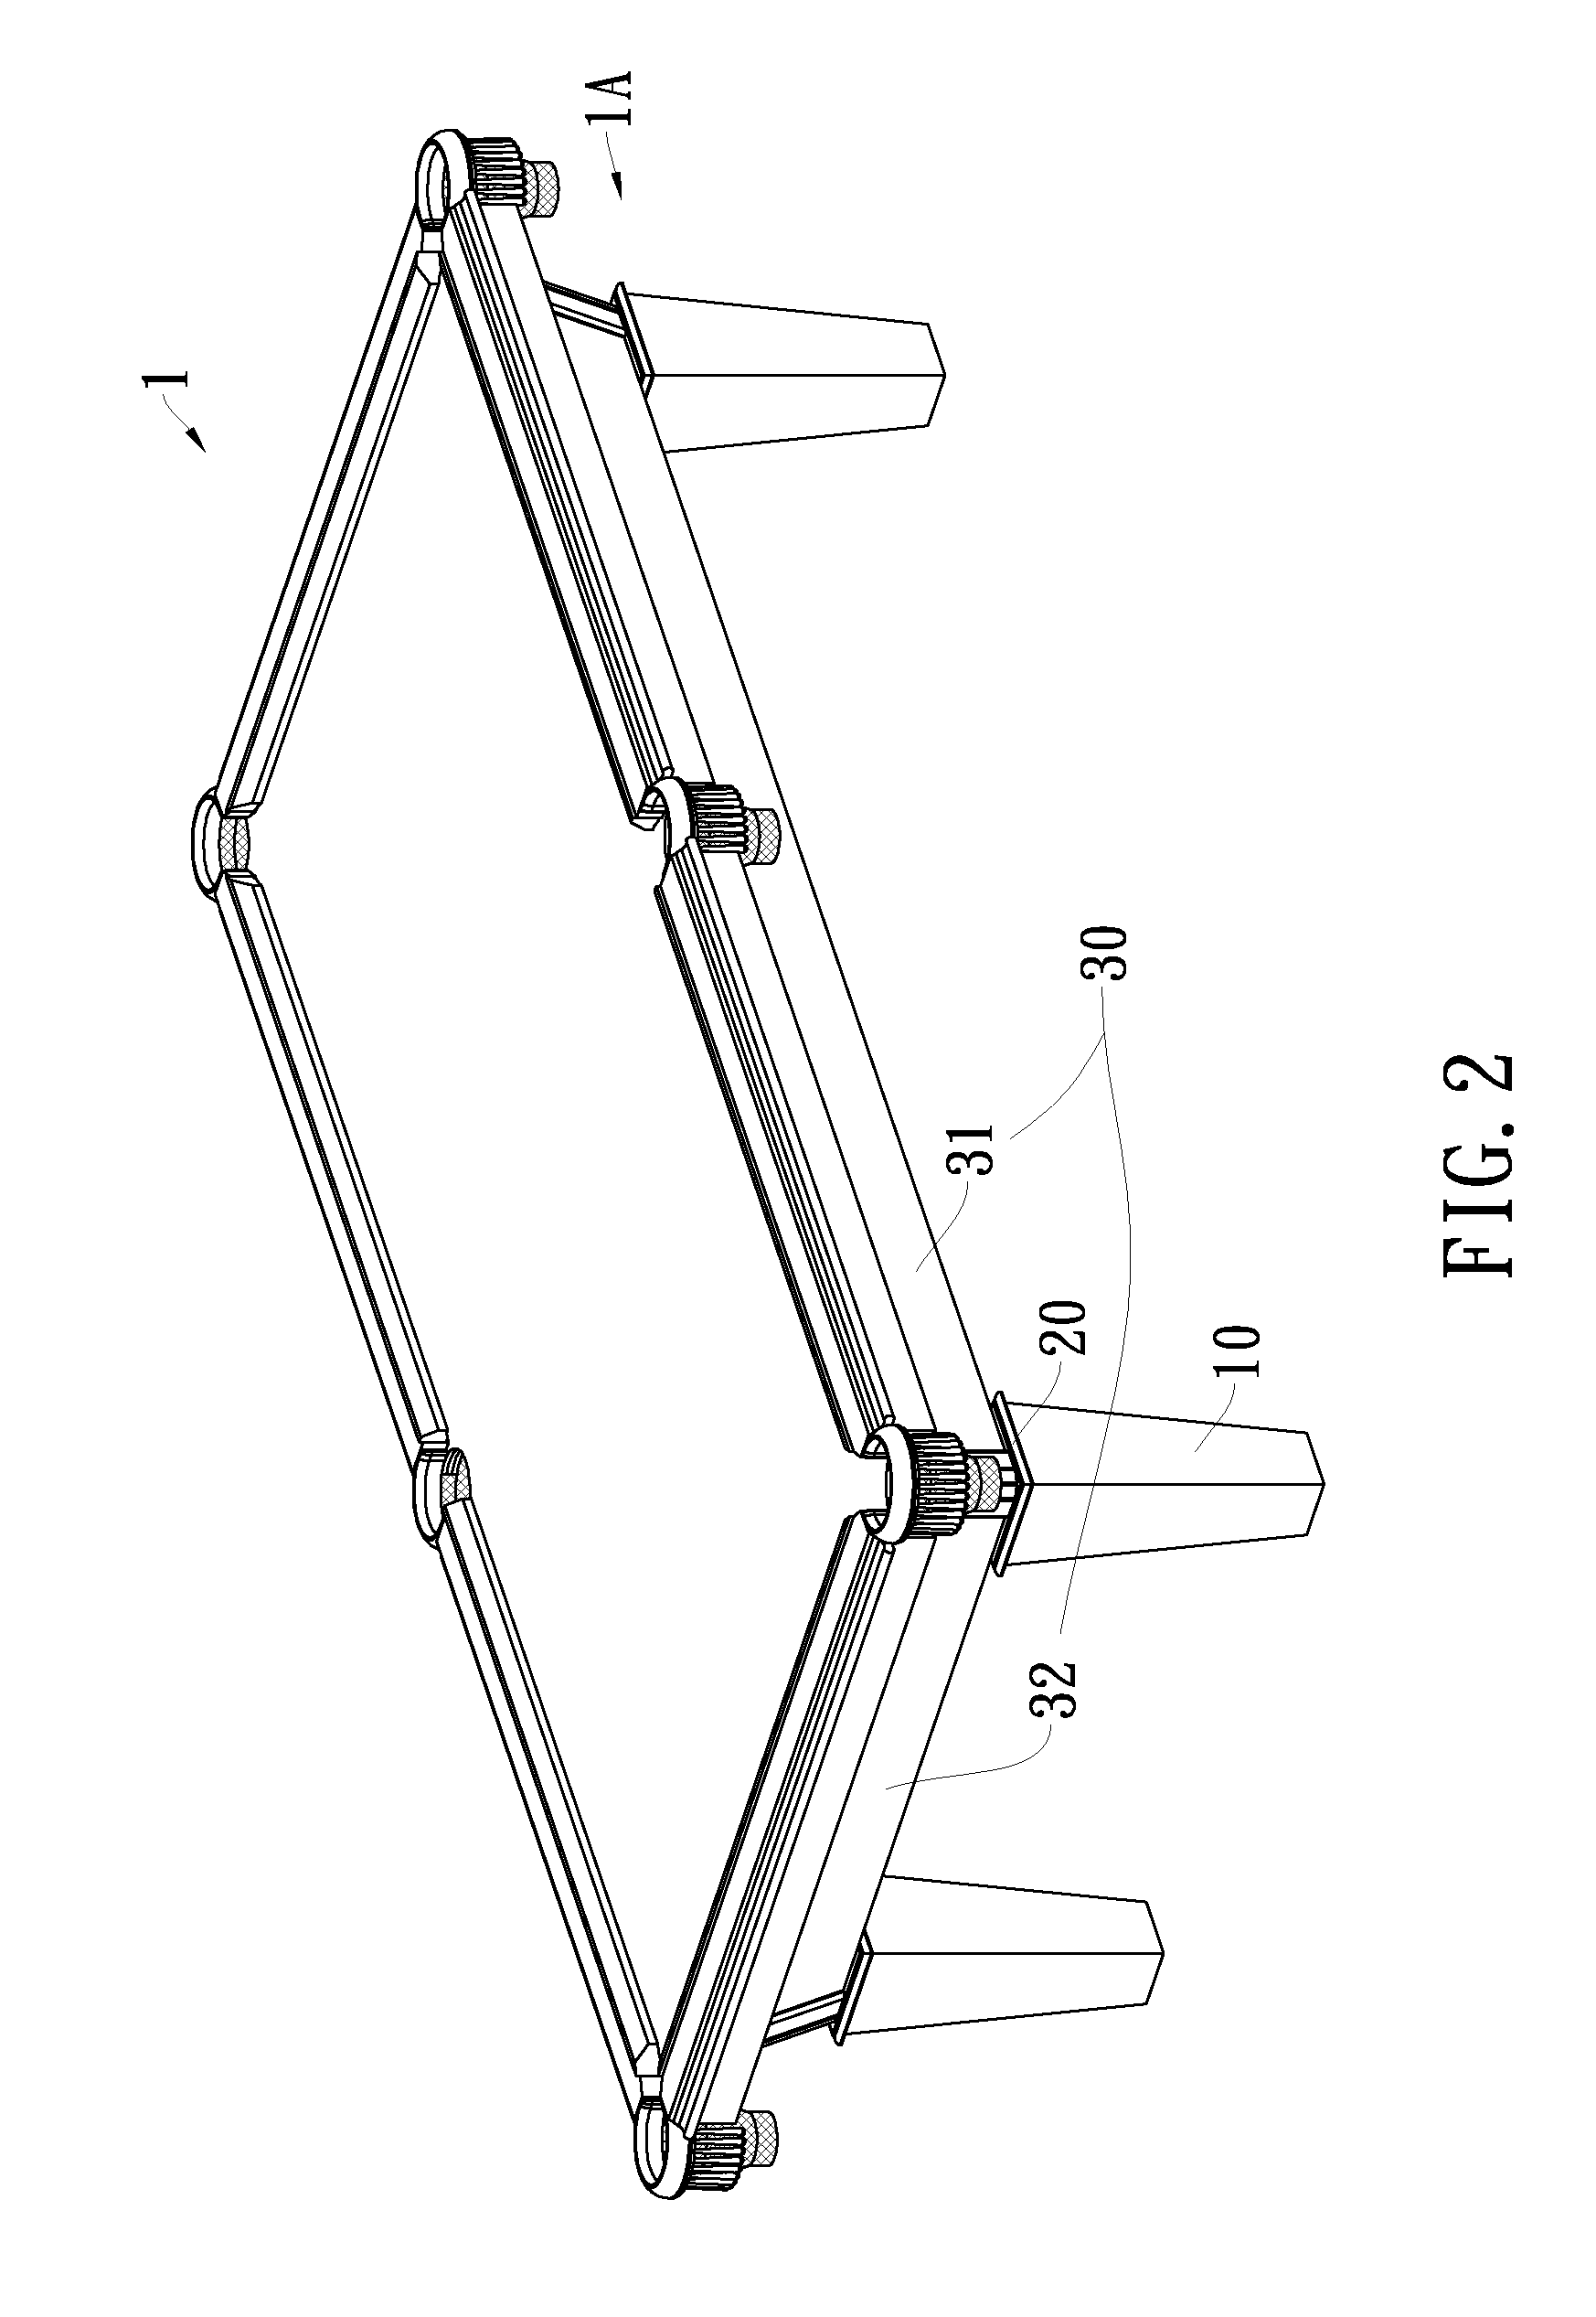 Pool table structure